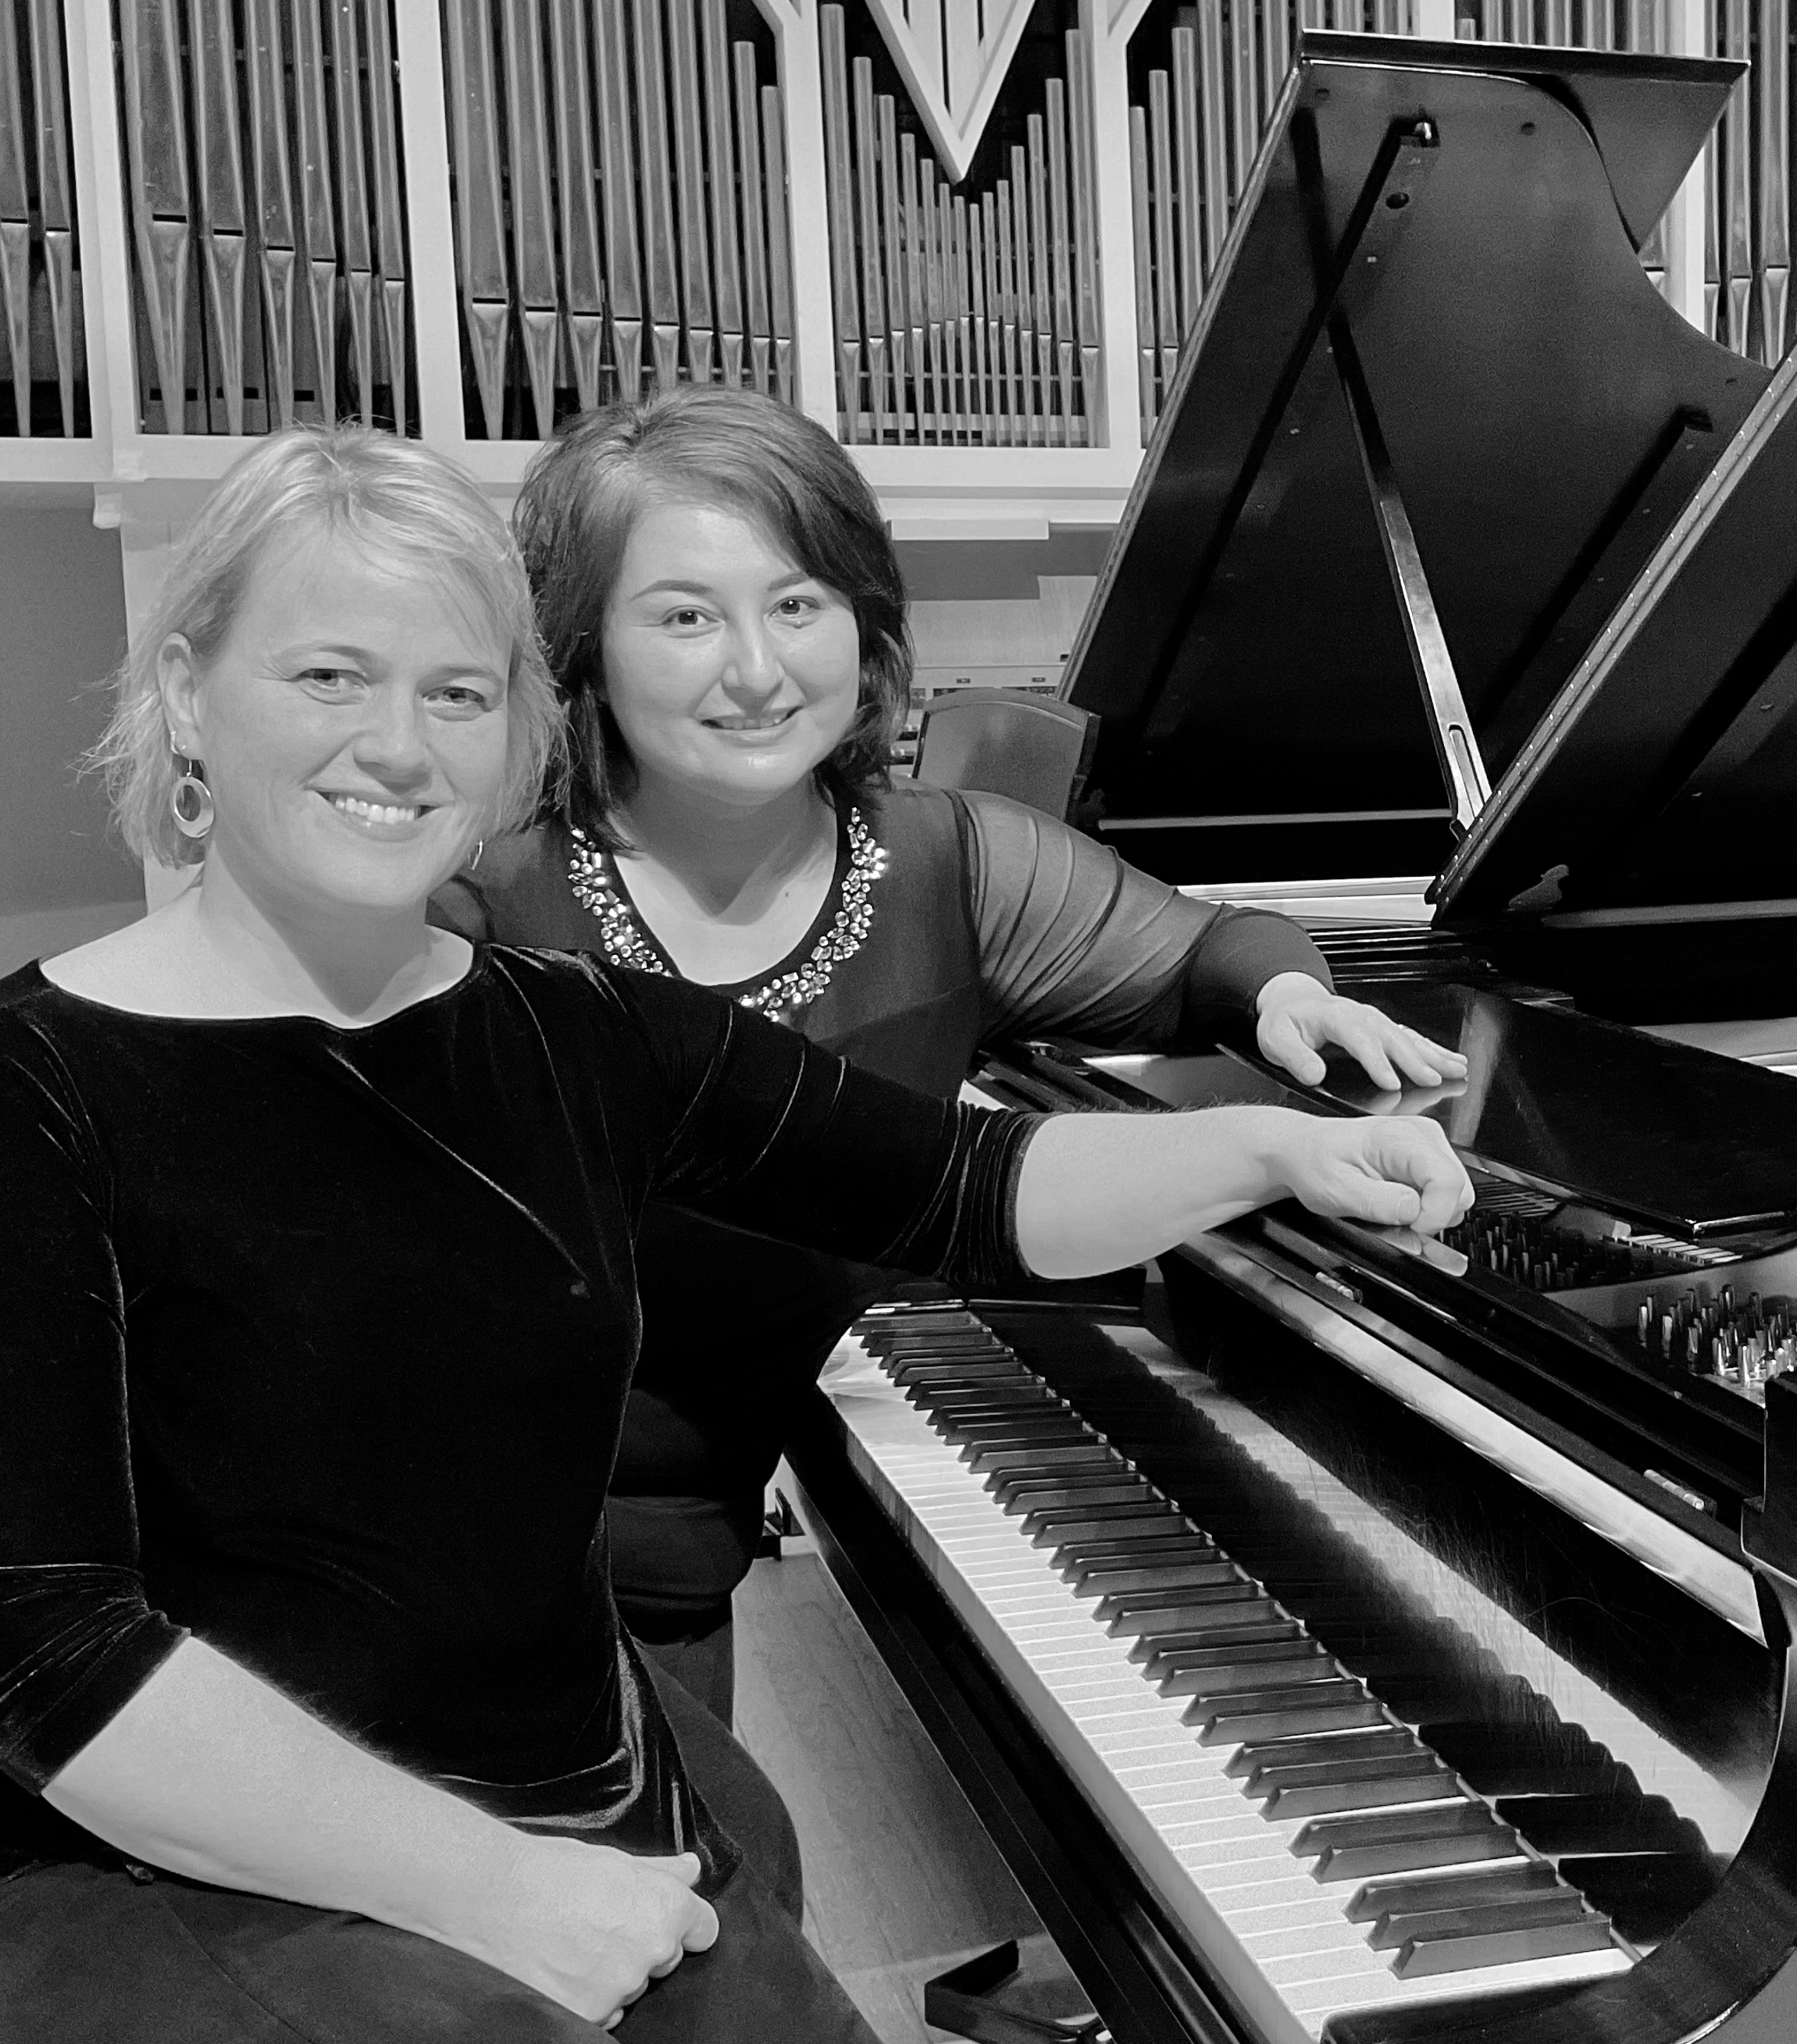 Kay Zavislak and Jensina Oliver sitting at a piano together, turned to the side with one hand on the piano top, smiling